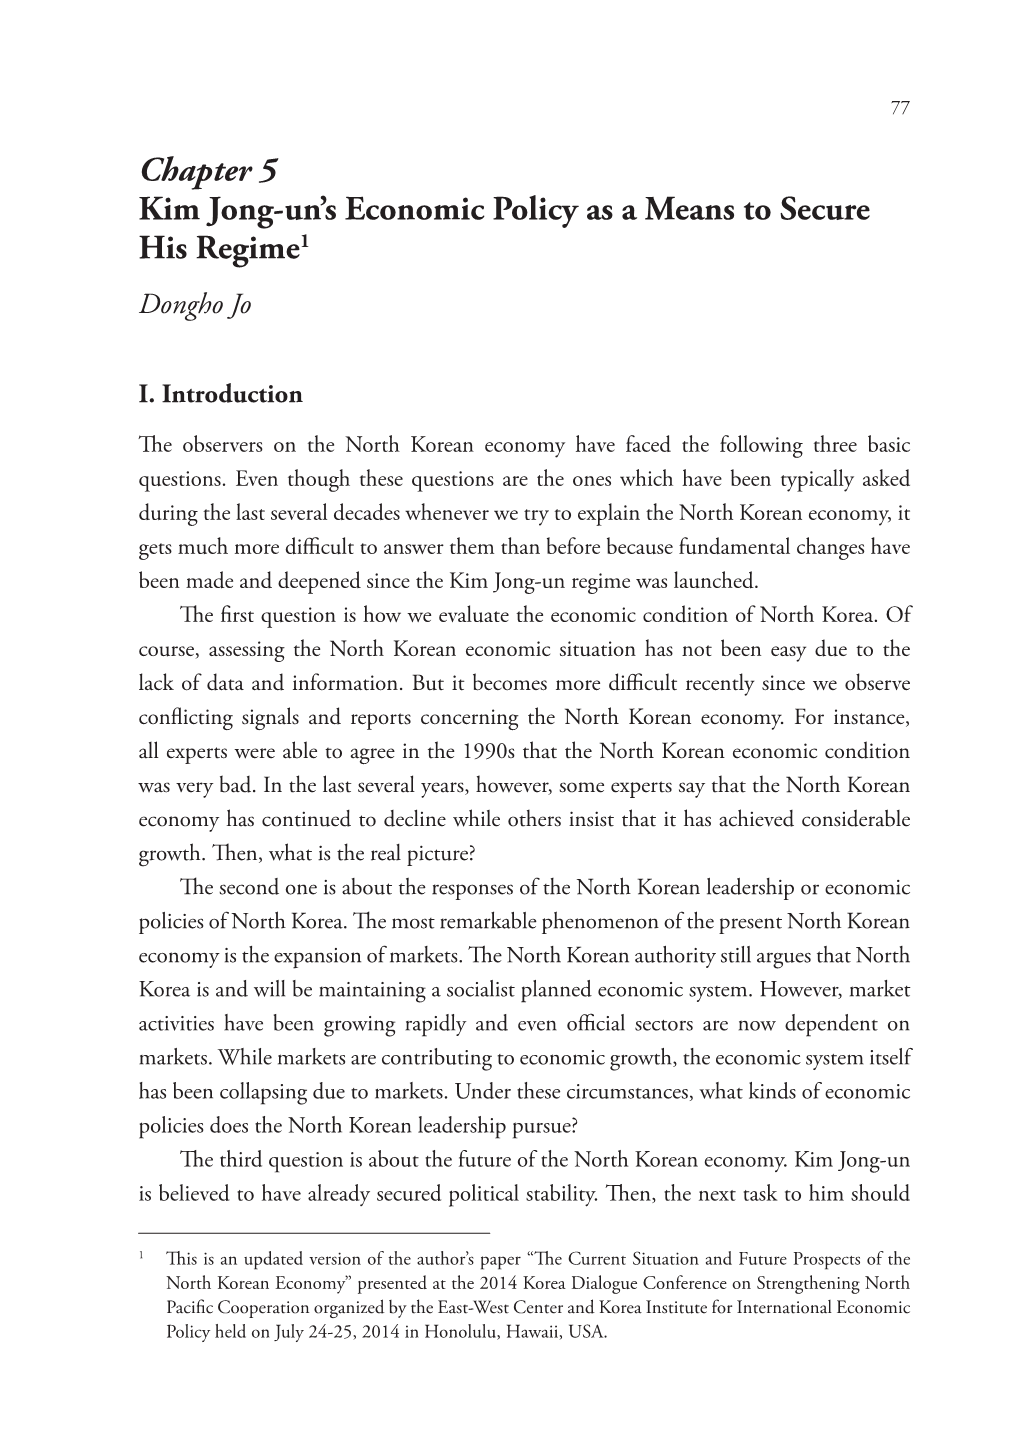 Chapter 5 Kim Jong-Un's Economic Policy As a Means to Secure His